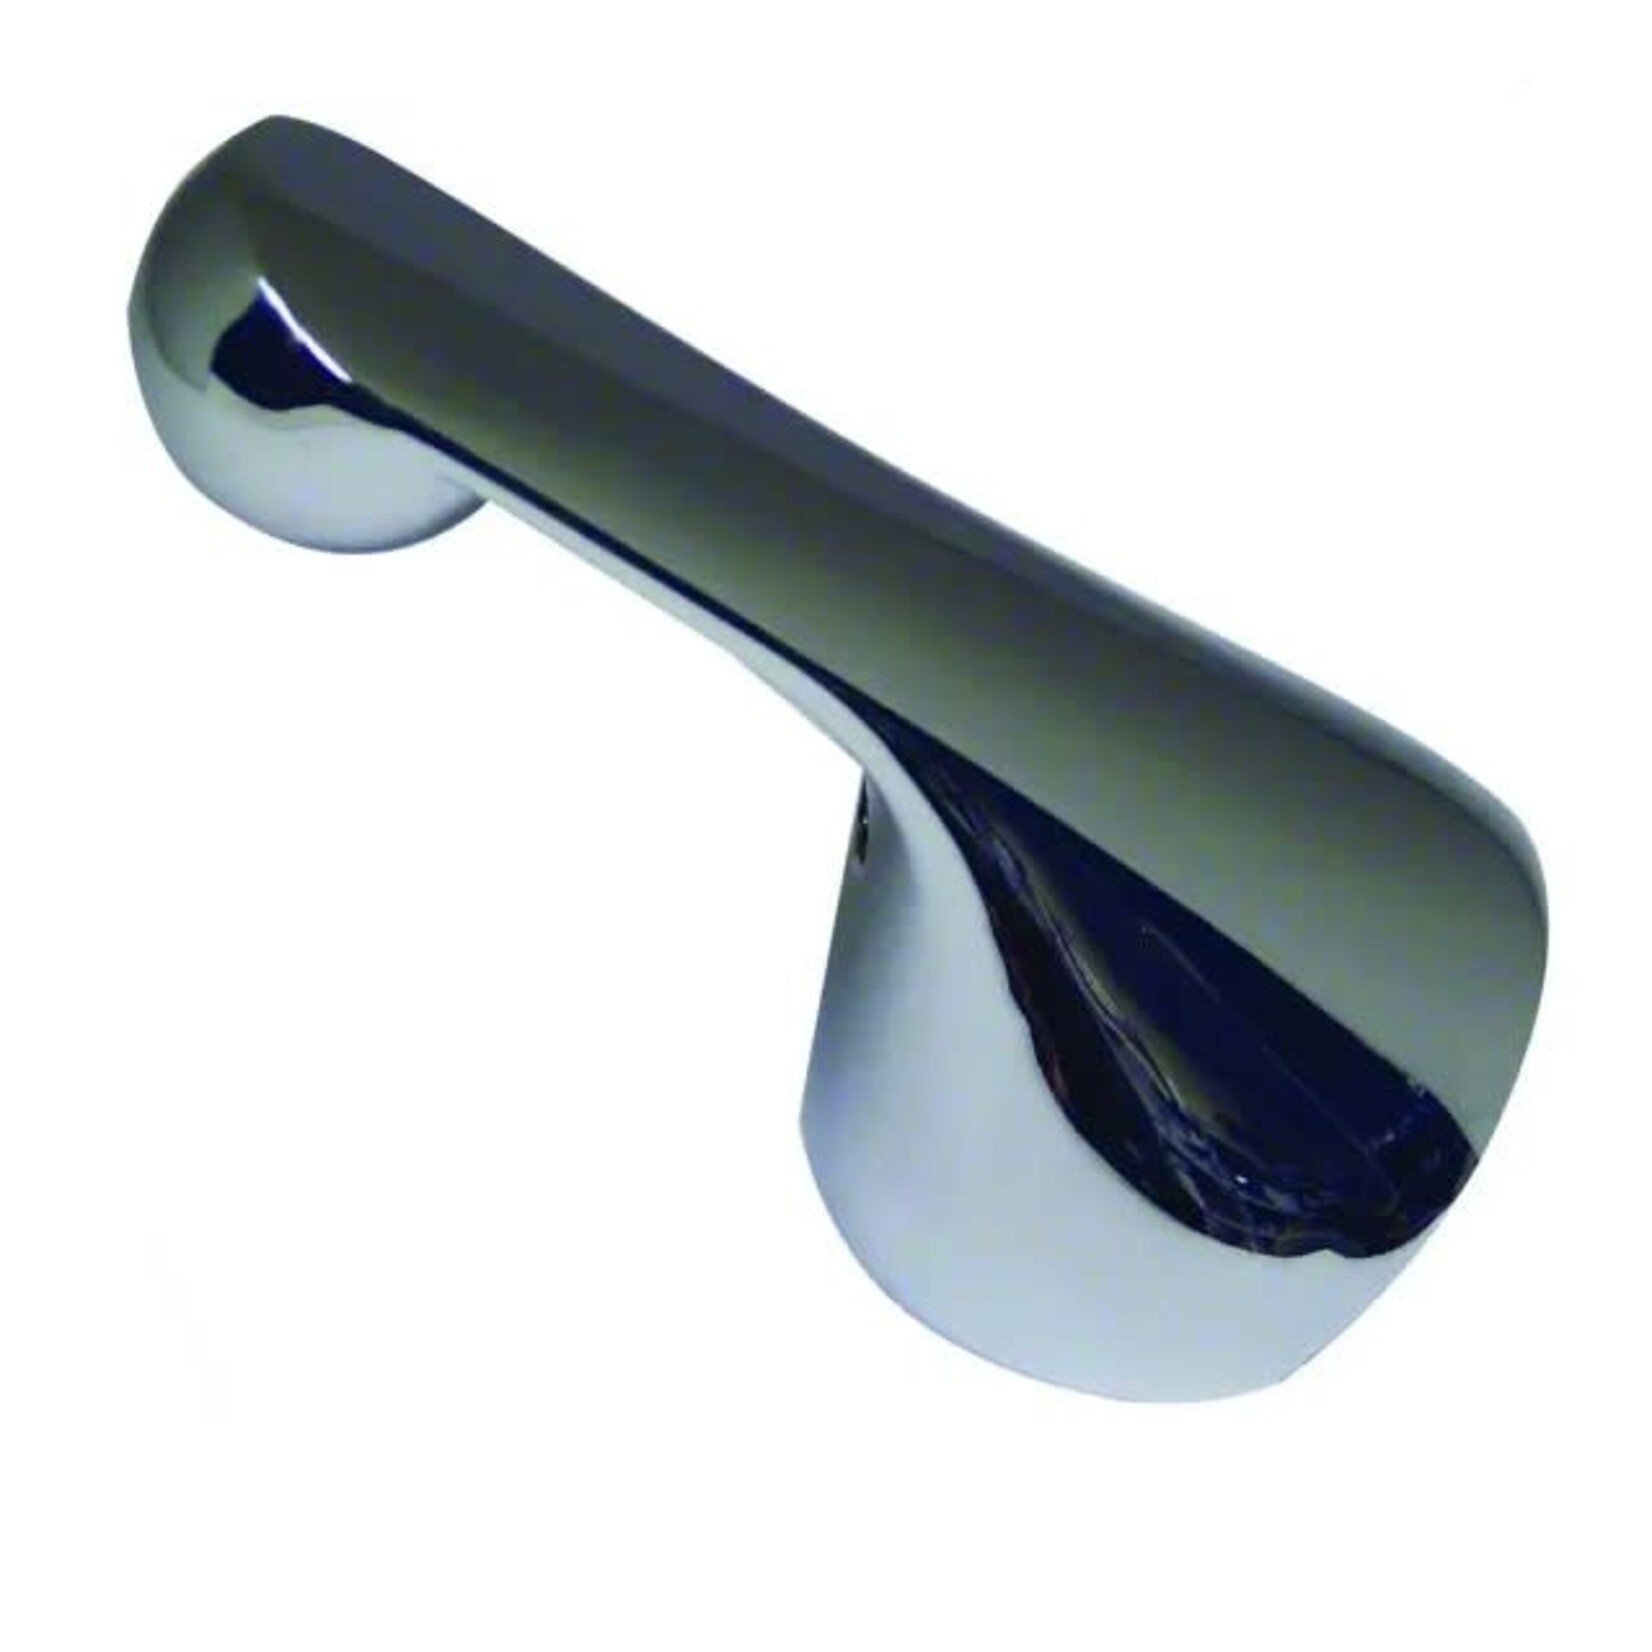 DANCO DANCO REPLACEMENT FOR DELTA SINK AND TUB SHOWER HANDLE